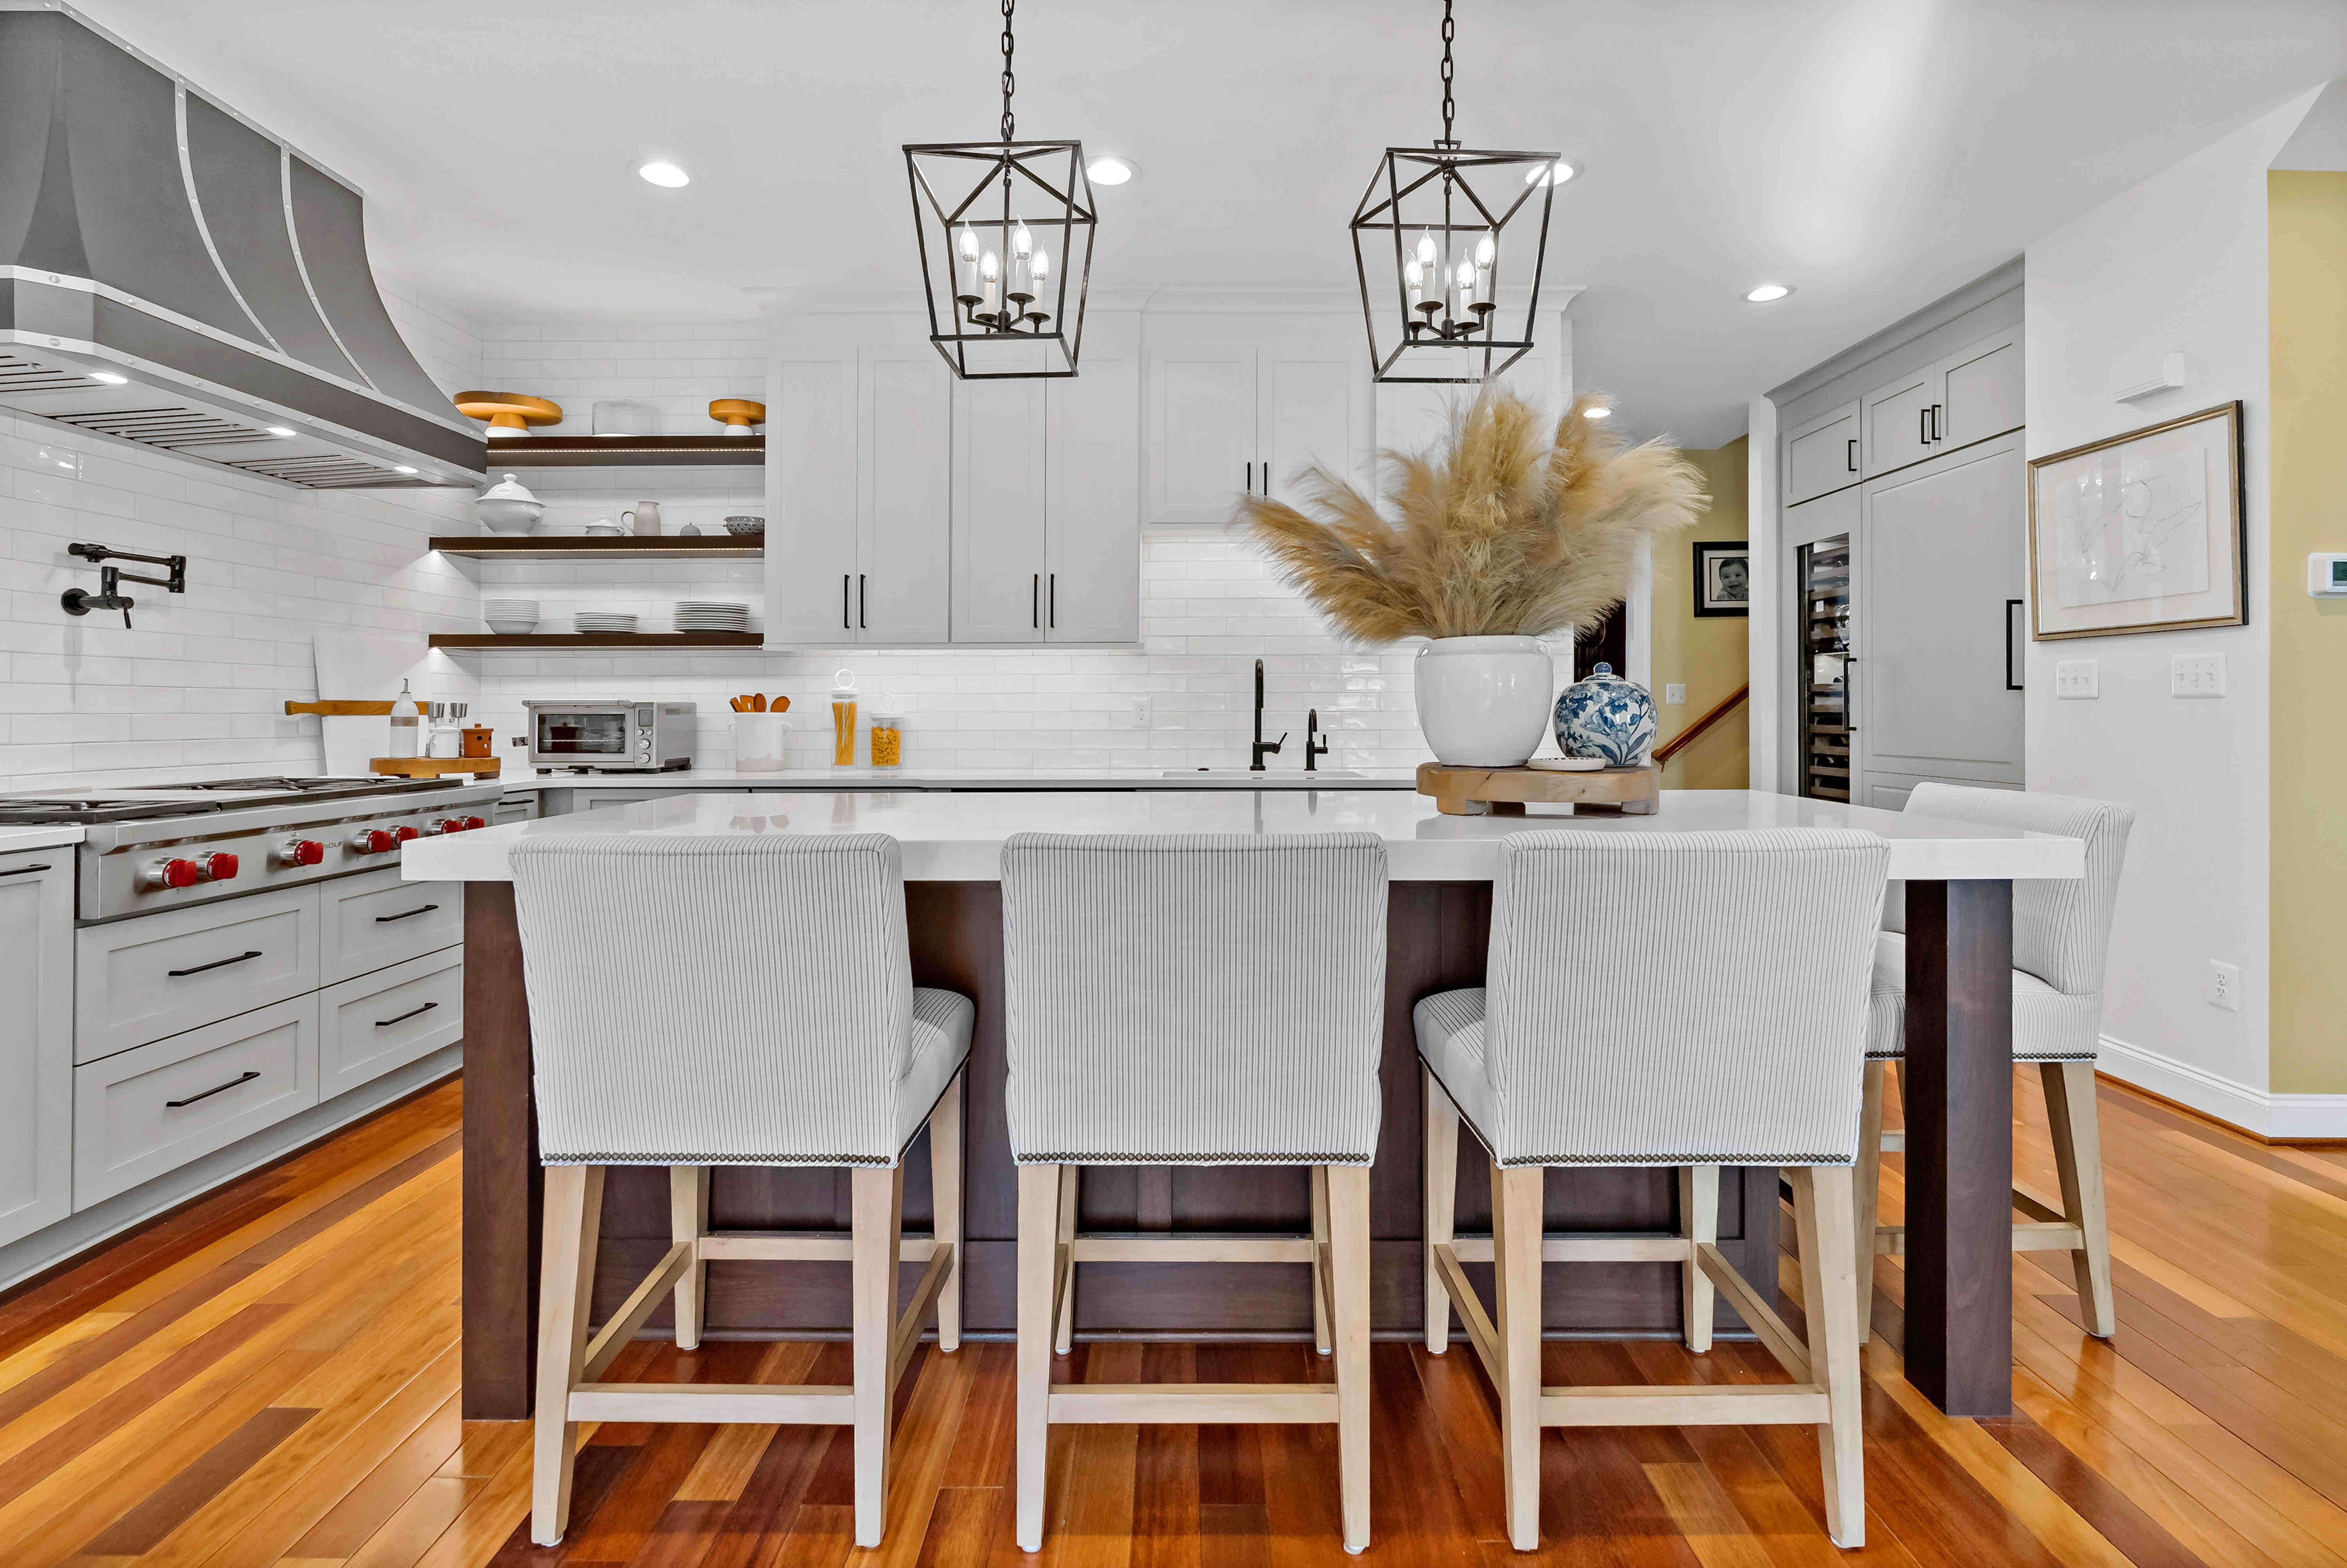 Kitchen island with pendant lighting above